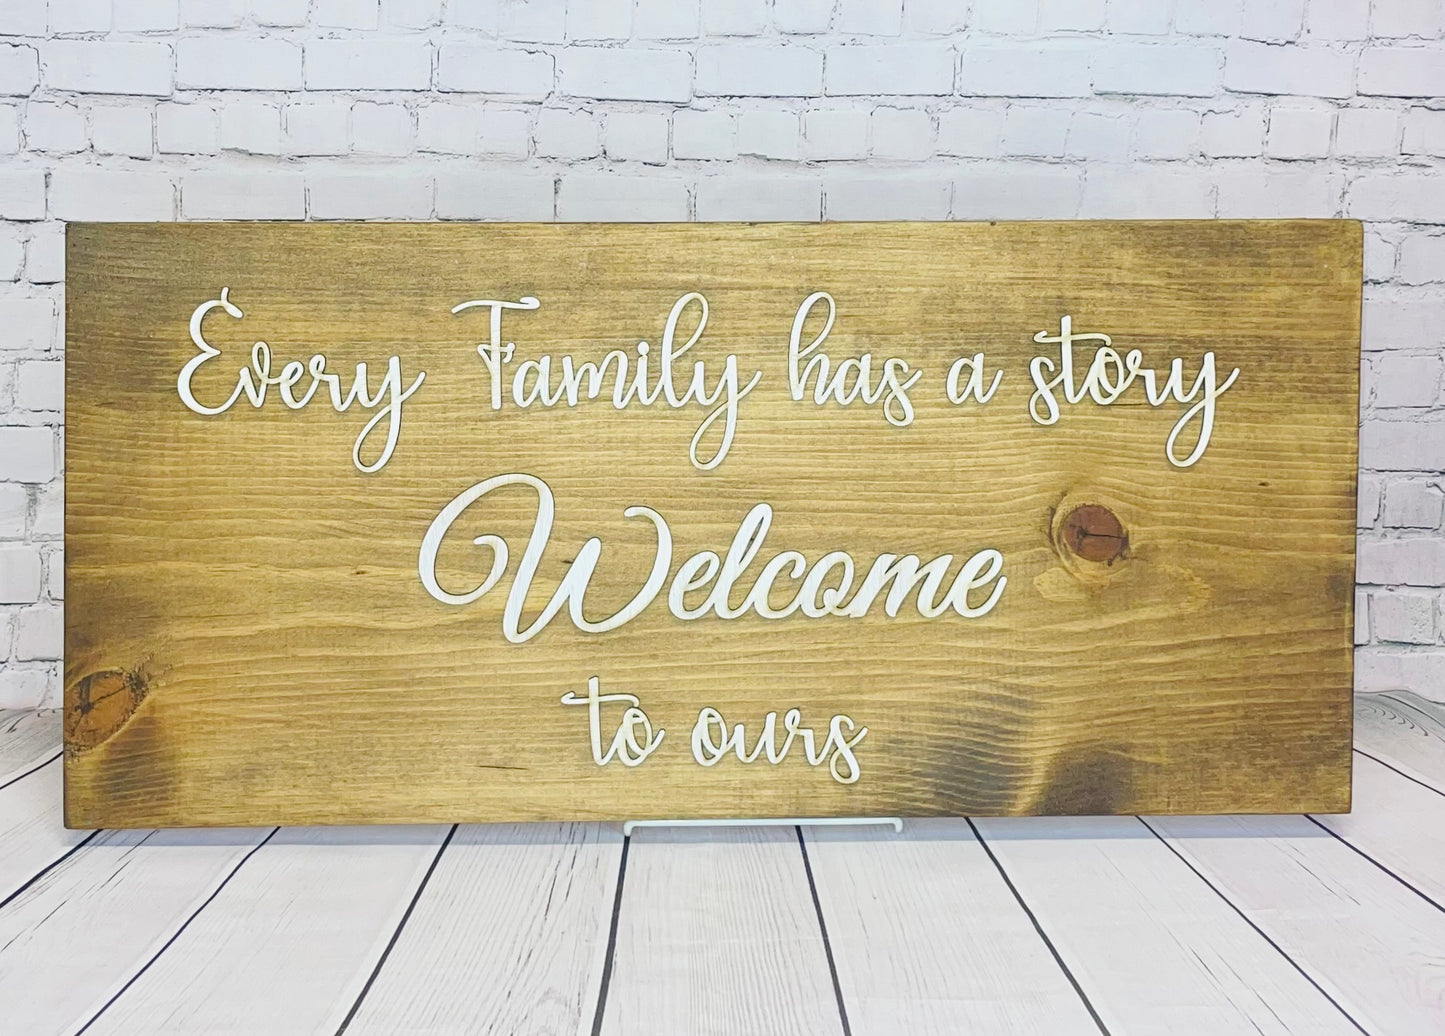 Every Family has a story Welcome to ours